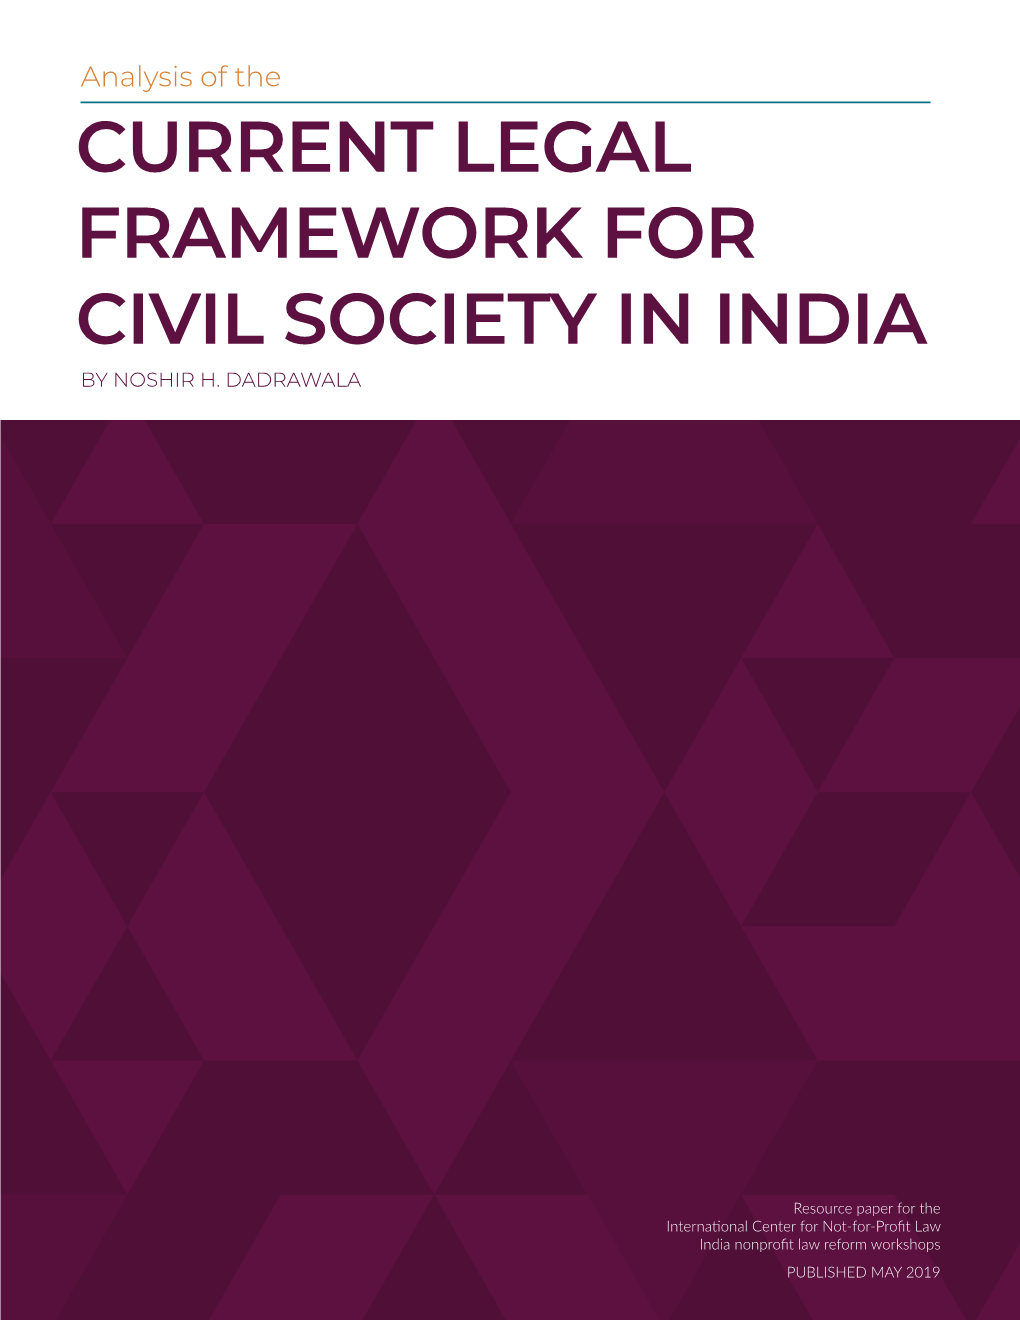 Current Legal Framework for Civil Society in India by Noshir H